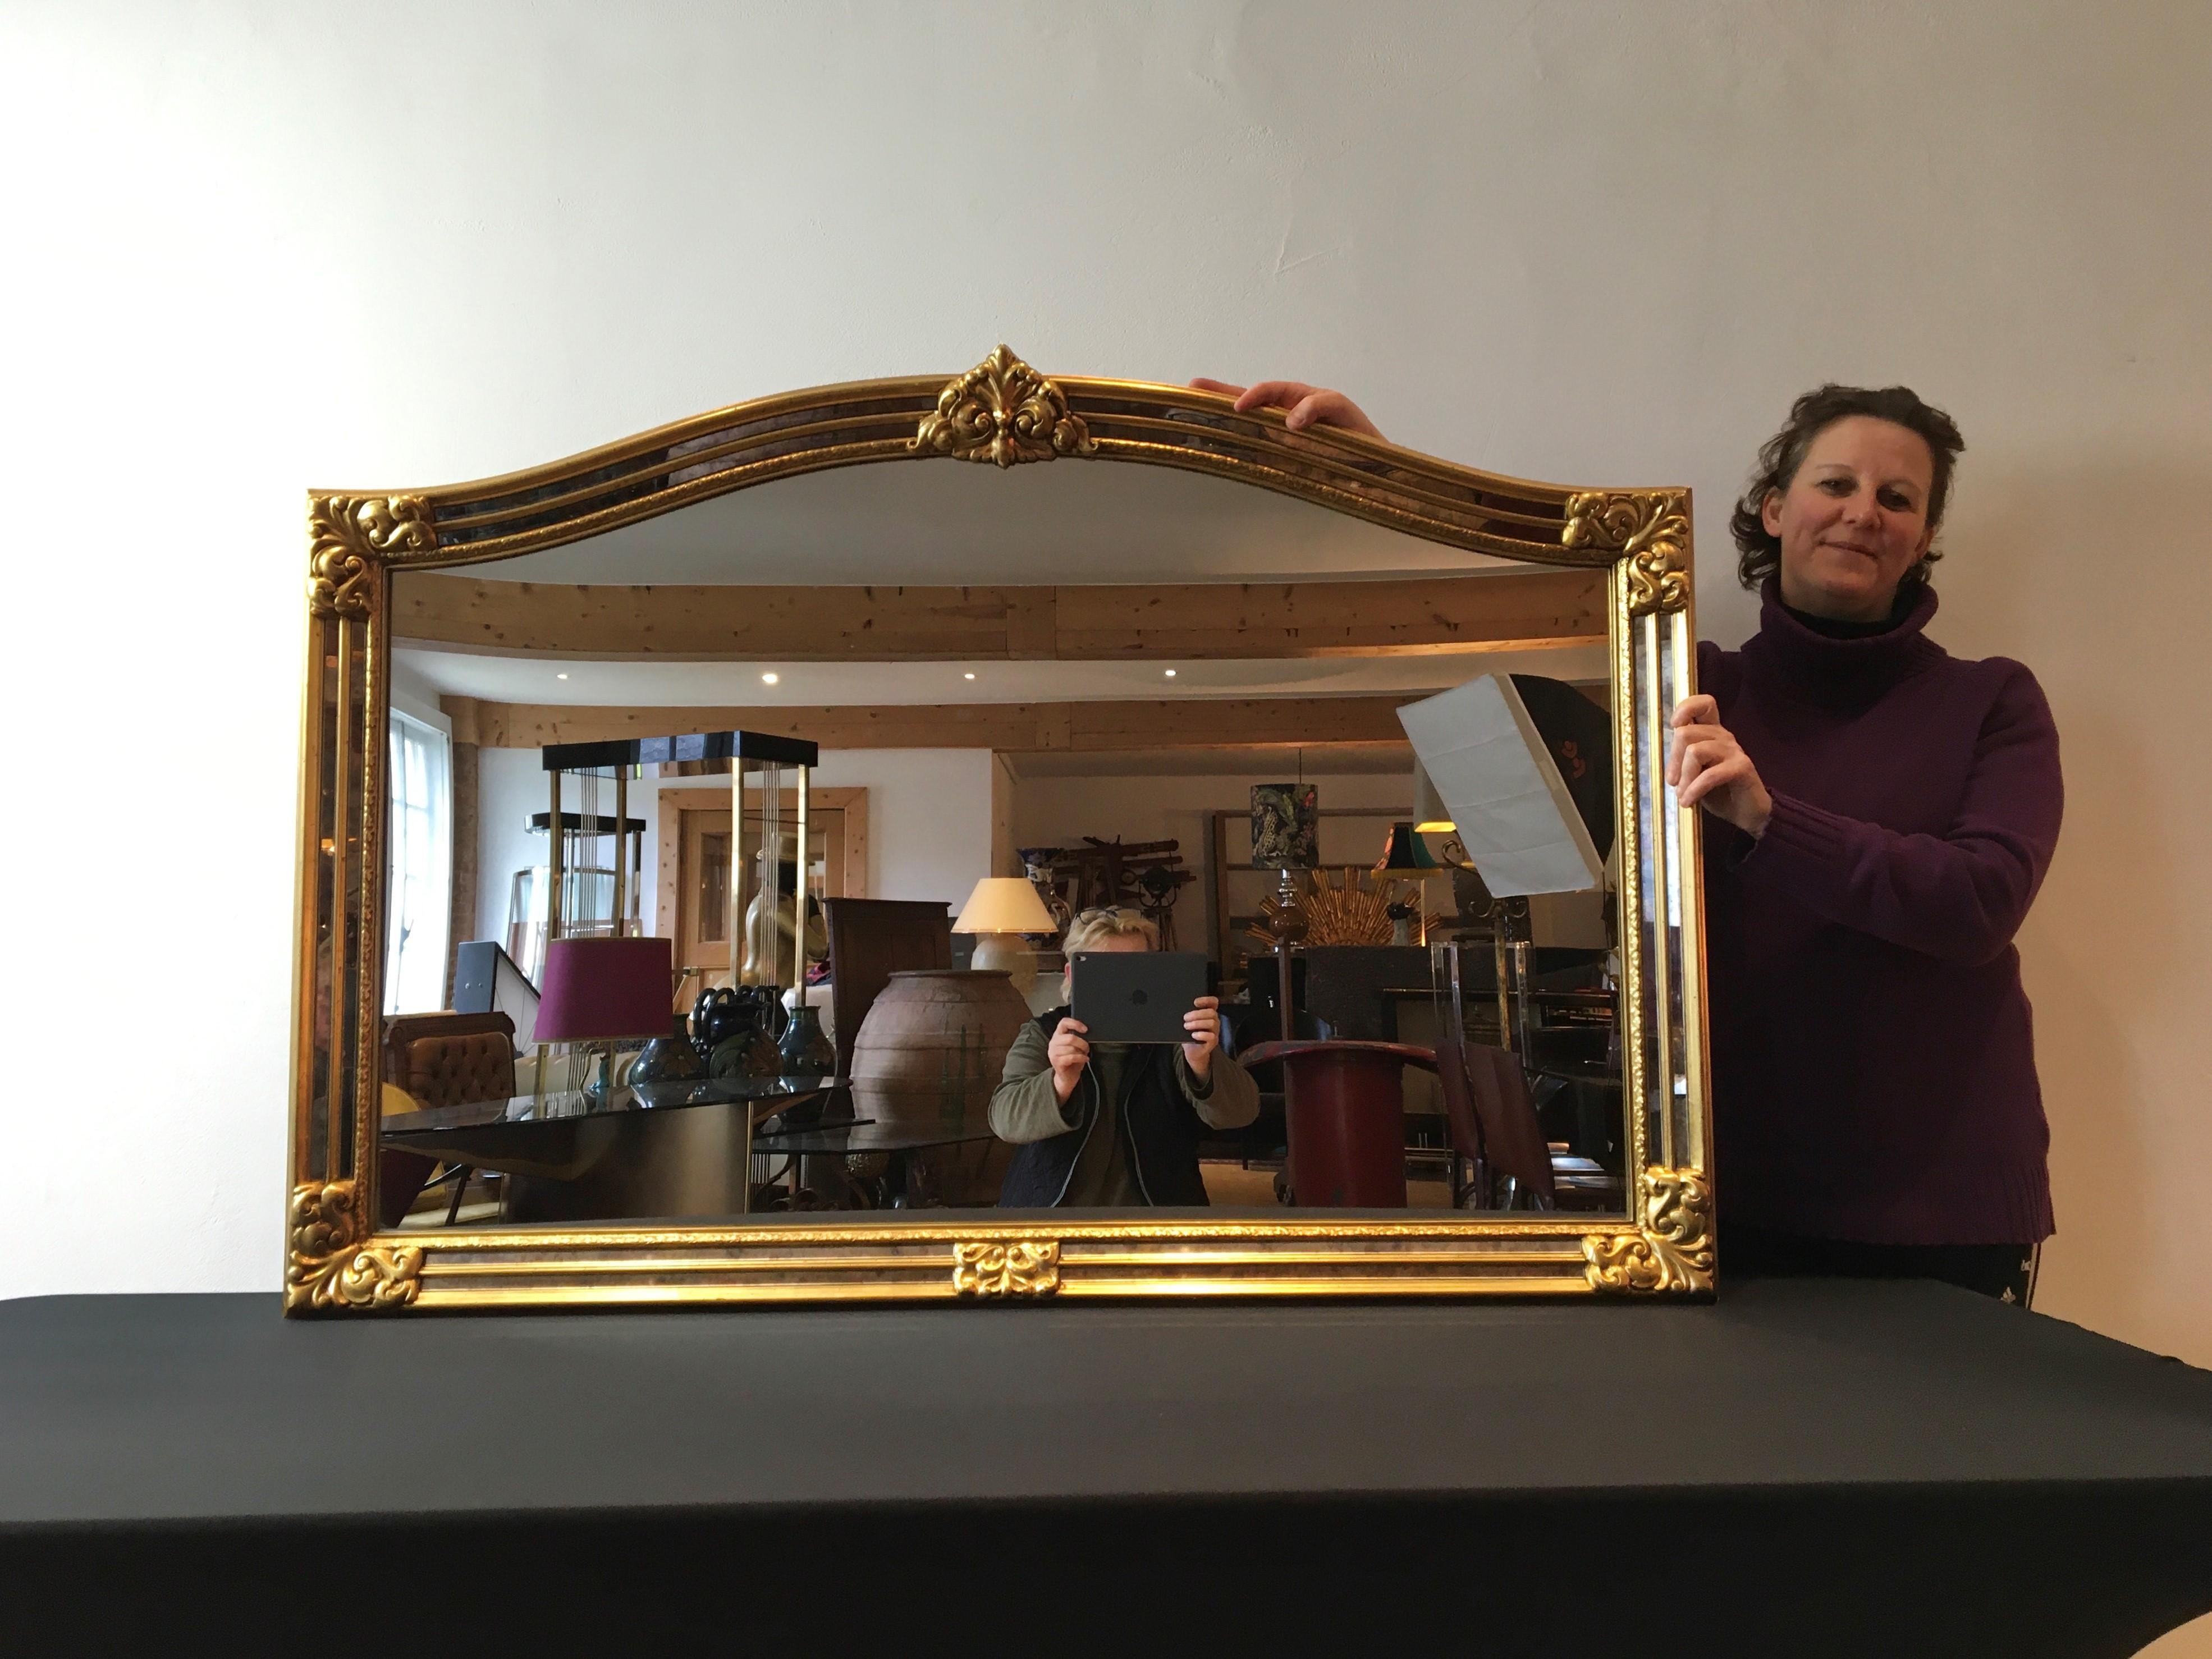 Stylish wall mirror by Deknudt Belgium.
Deknudt Luxury High Quality mirrors Made in Belgium.
This large gilded mirror dates from the 1970s.
It's a large Hollywood Regency mirror with gold colored frame and faceted glass in the border. It's a great